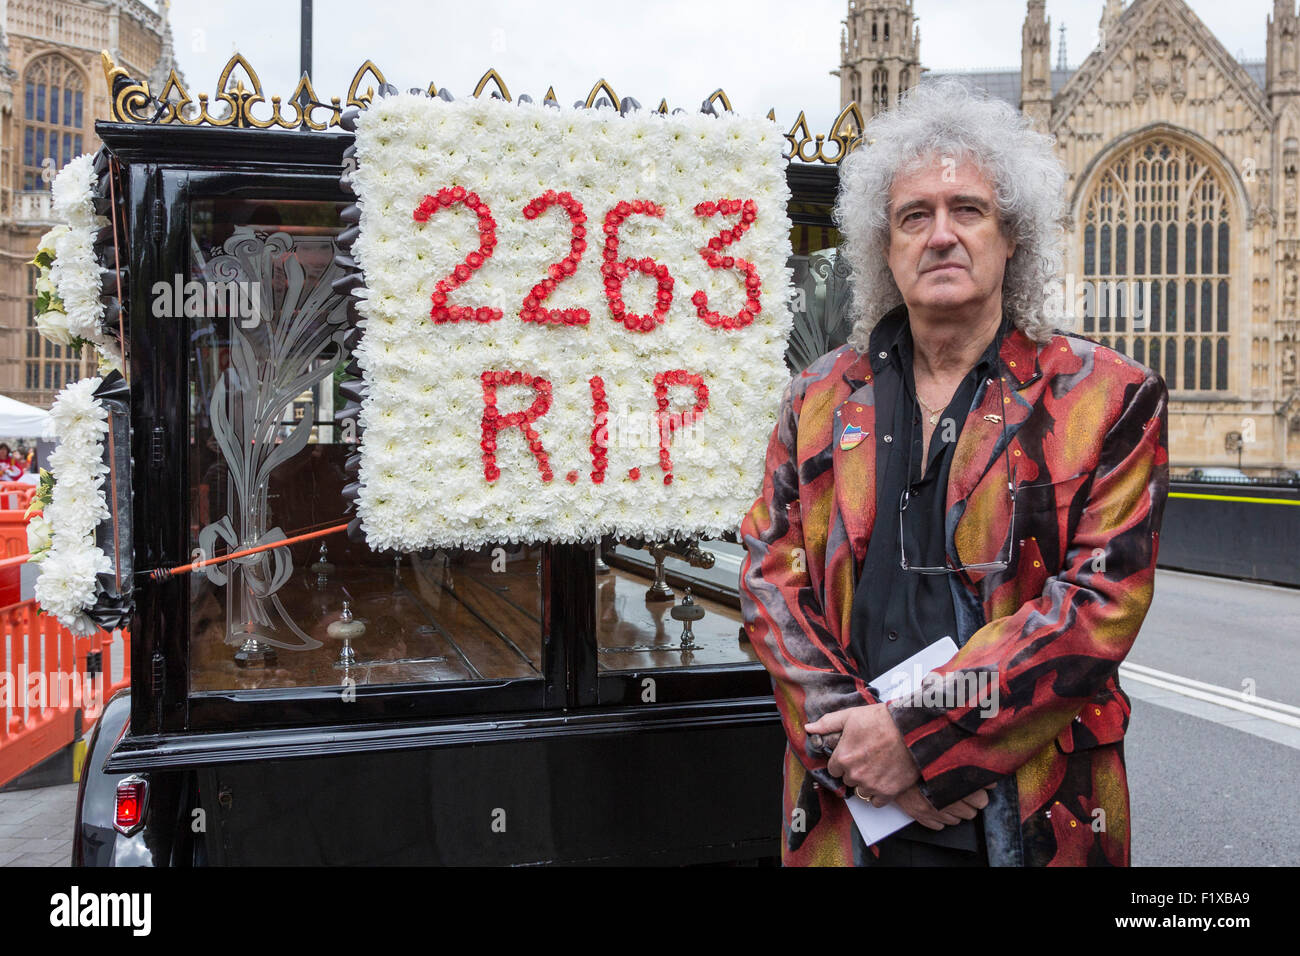 London, UK. 8th September, 2015. Dr Brian May, astrophysicist and guitarist of Queen, joins the Stop the Badger Cull protest at the Houses of Parliament. The protesters, including the animal rights organisation PETA, plan to launch legal action against the culling. Badgers are carriers of Bovine TB (Mycobacterium bovis) and thought to be responsible for spreading the disease. Photo: VIbrant Pictures/Alamy Live News Stock Photo